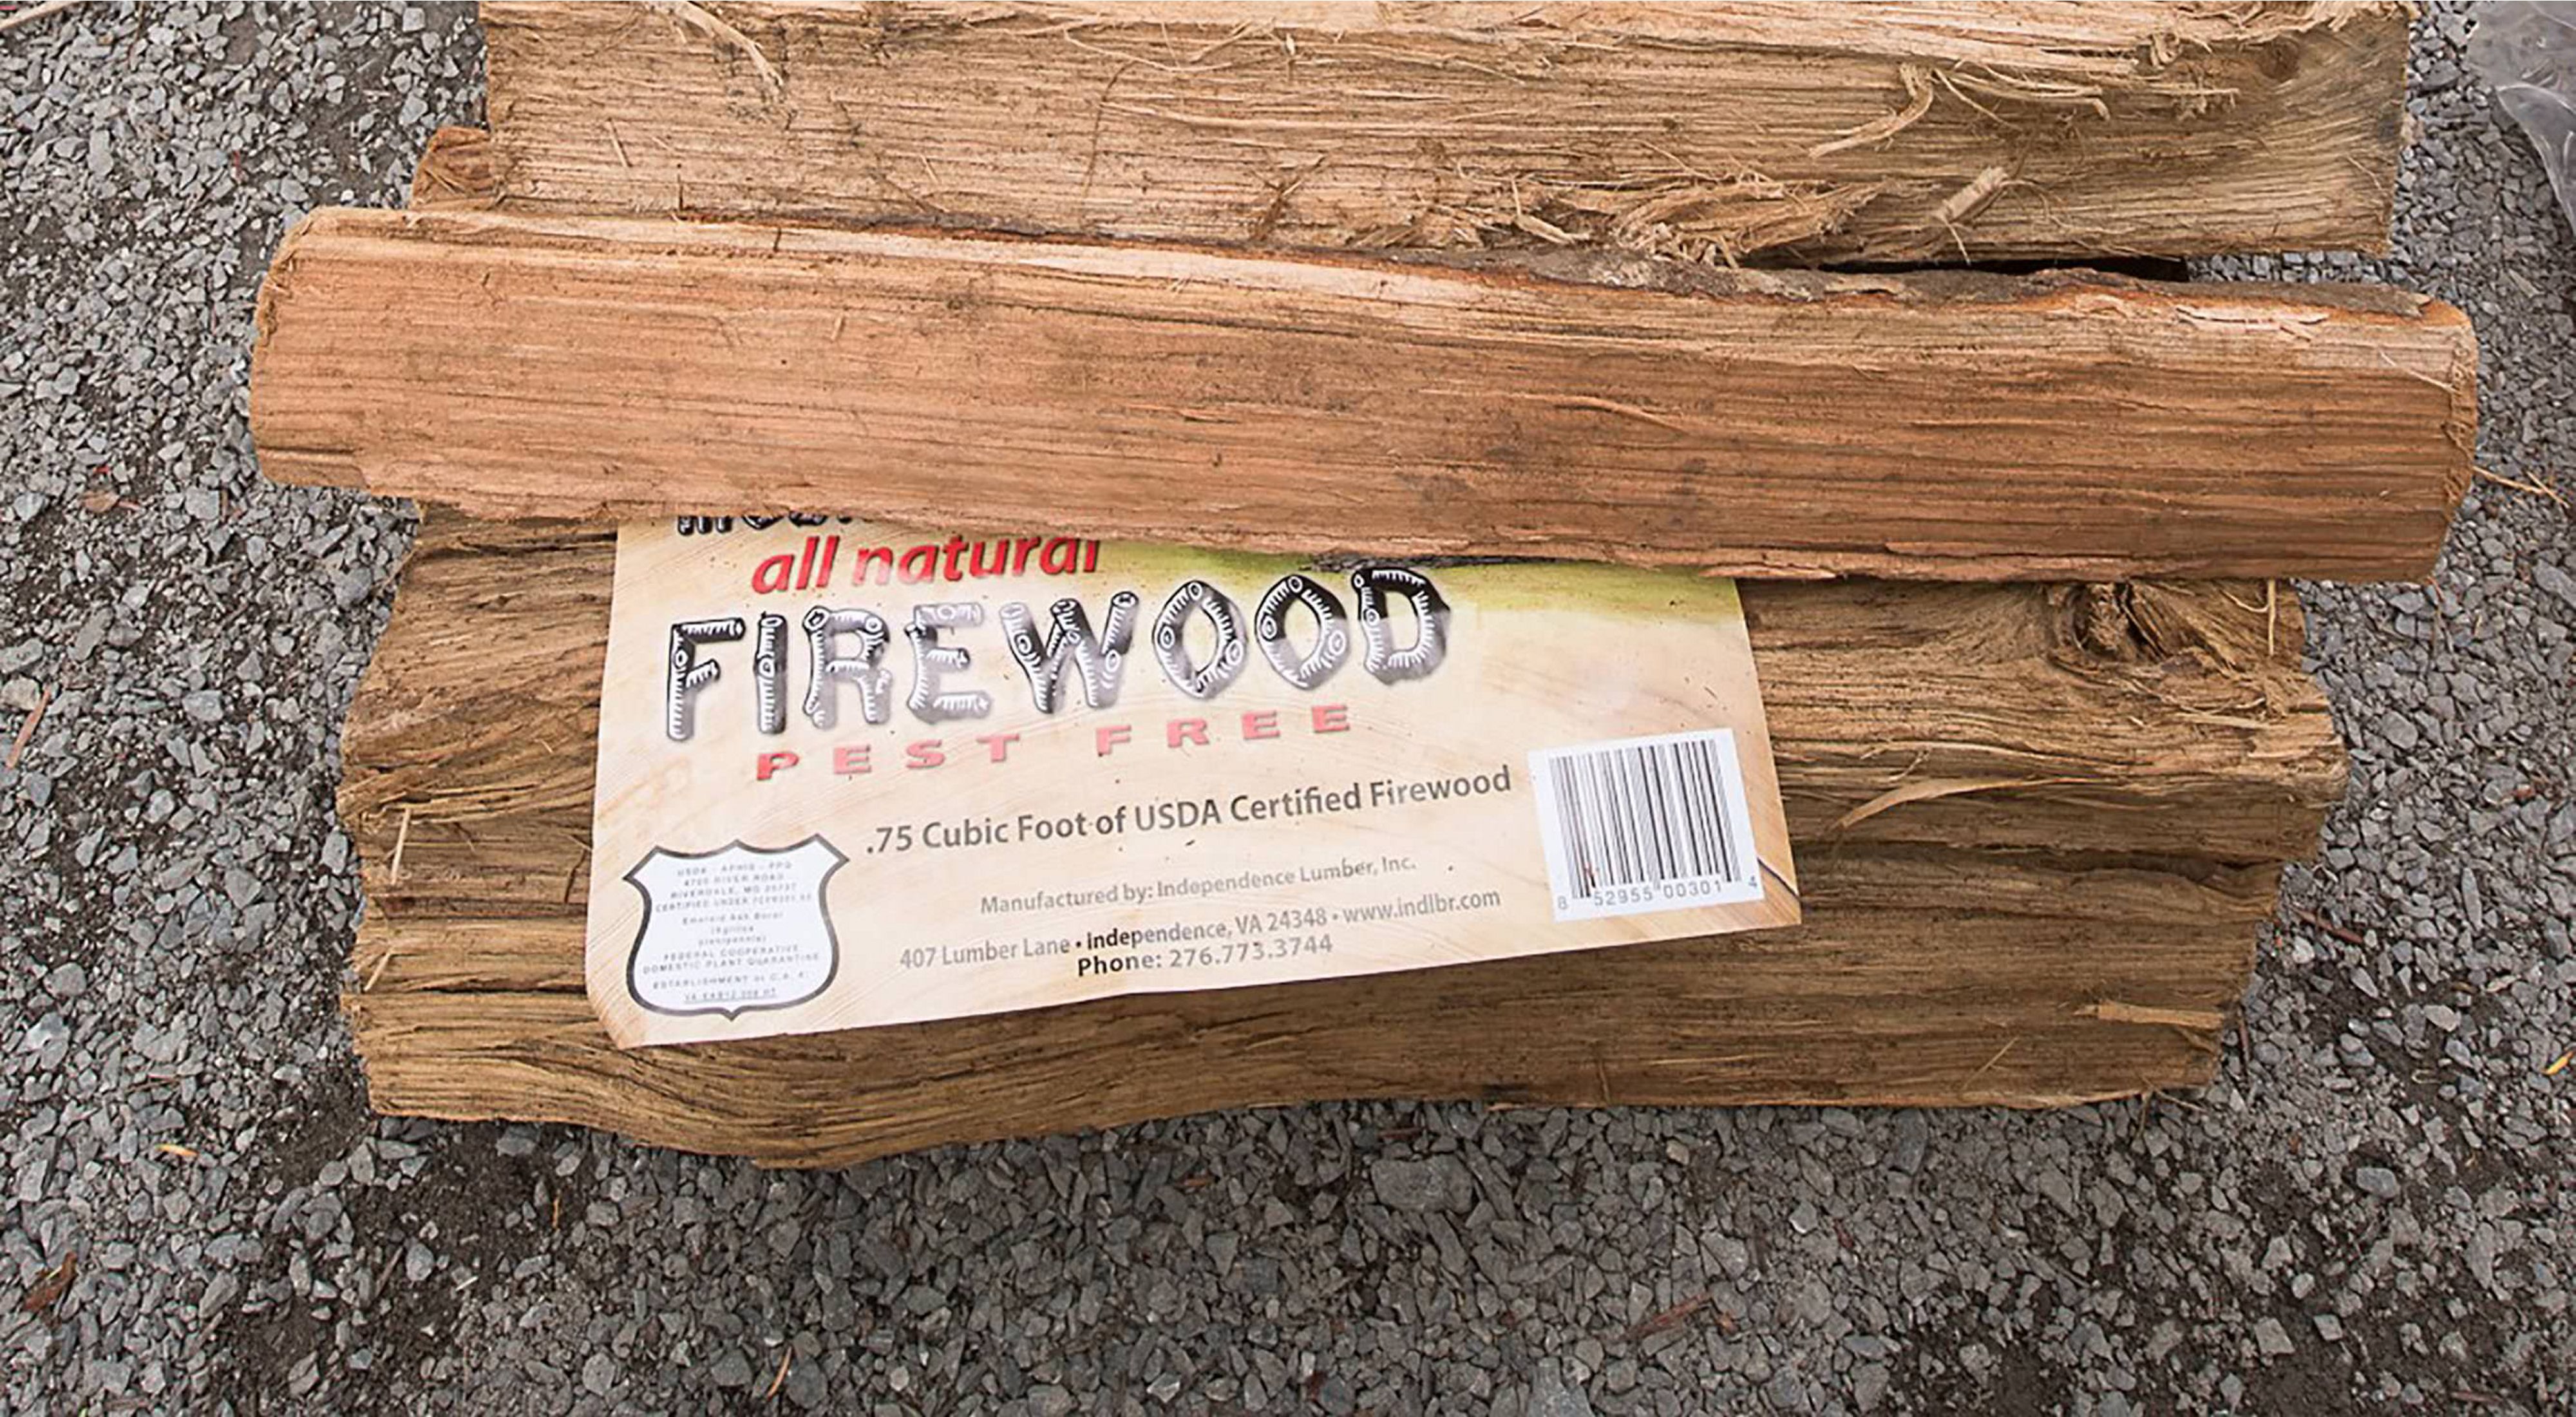 A pile of heat-treated firewood awaits purchase.